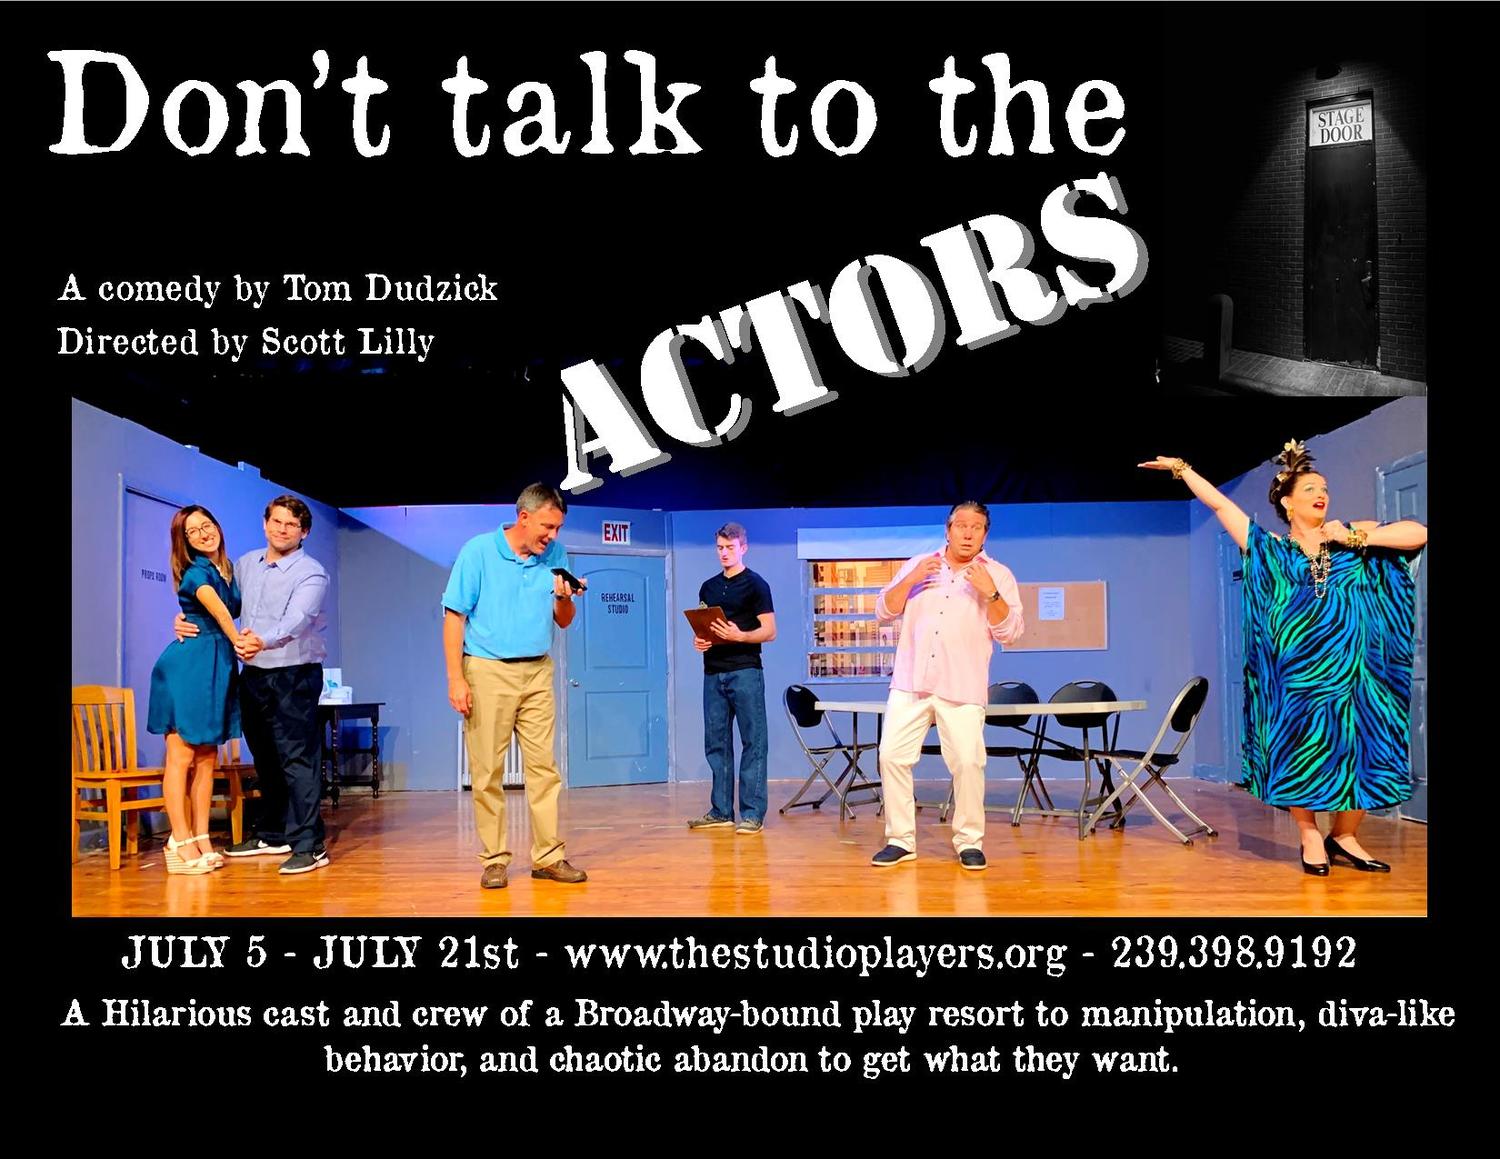 Don't talk to the Actors running now through July 21st!